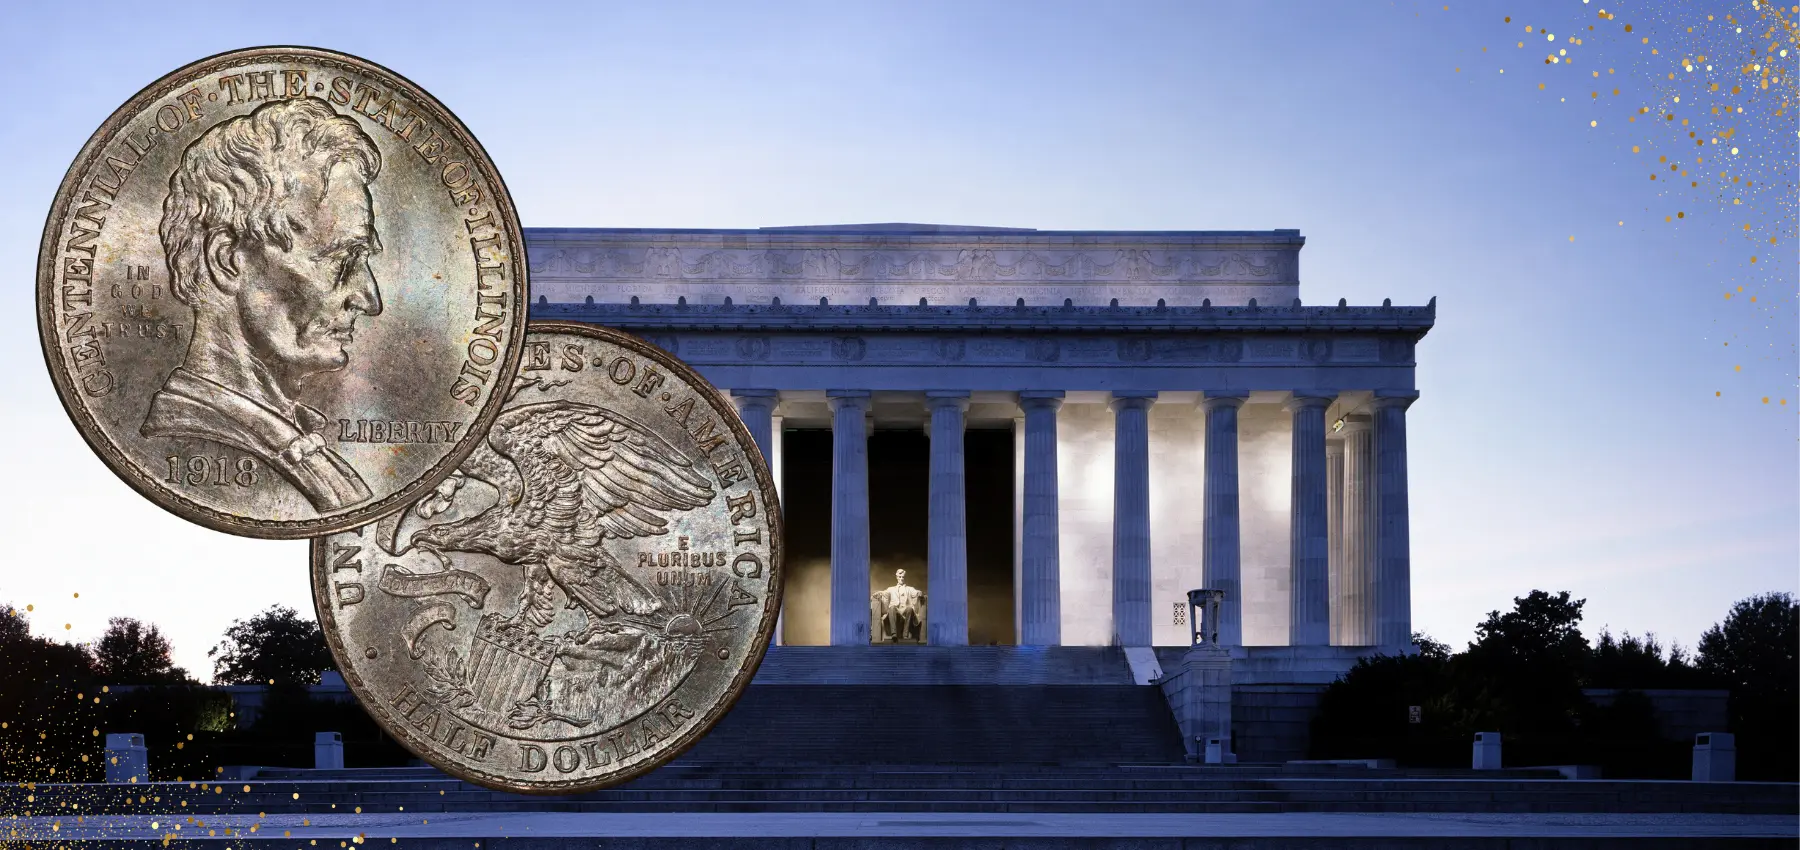 Lincoln Memorial in the background .A
                                         silver Centennial Illinois Half Dollar obverse and reverse in the forefront.